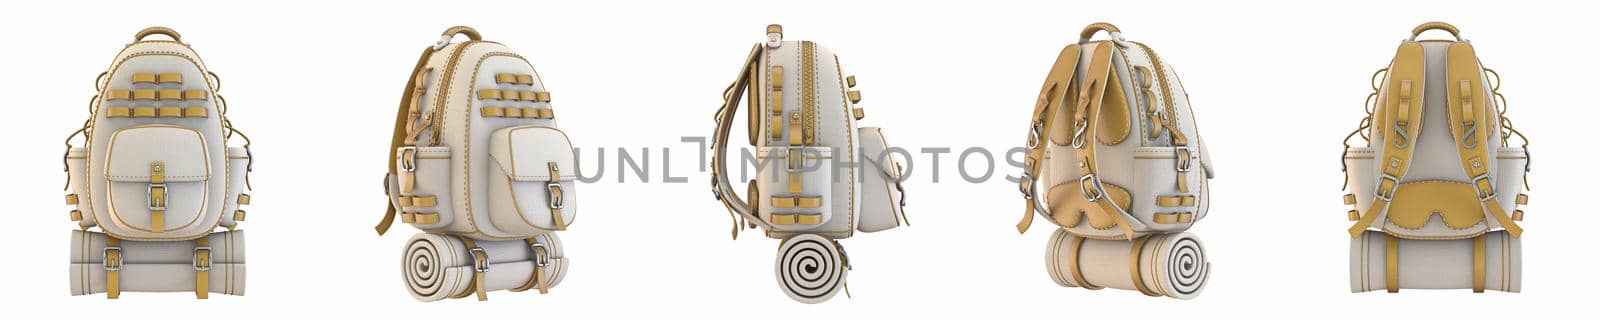 Canvas and leather backpack Rotating view 3D render illustration isolated on white background